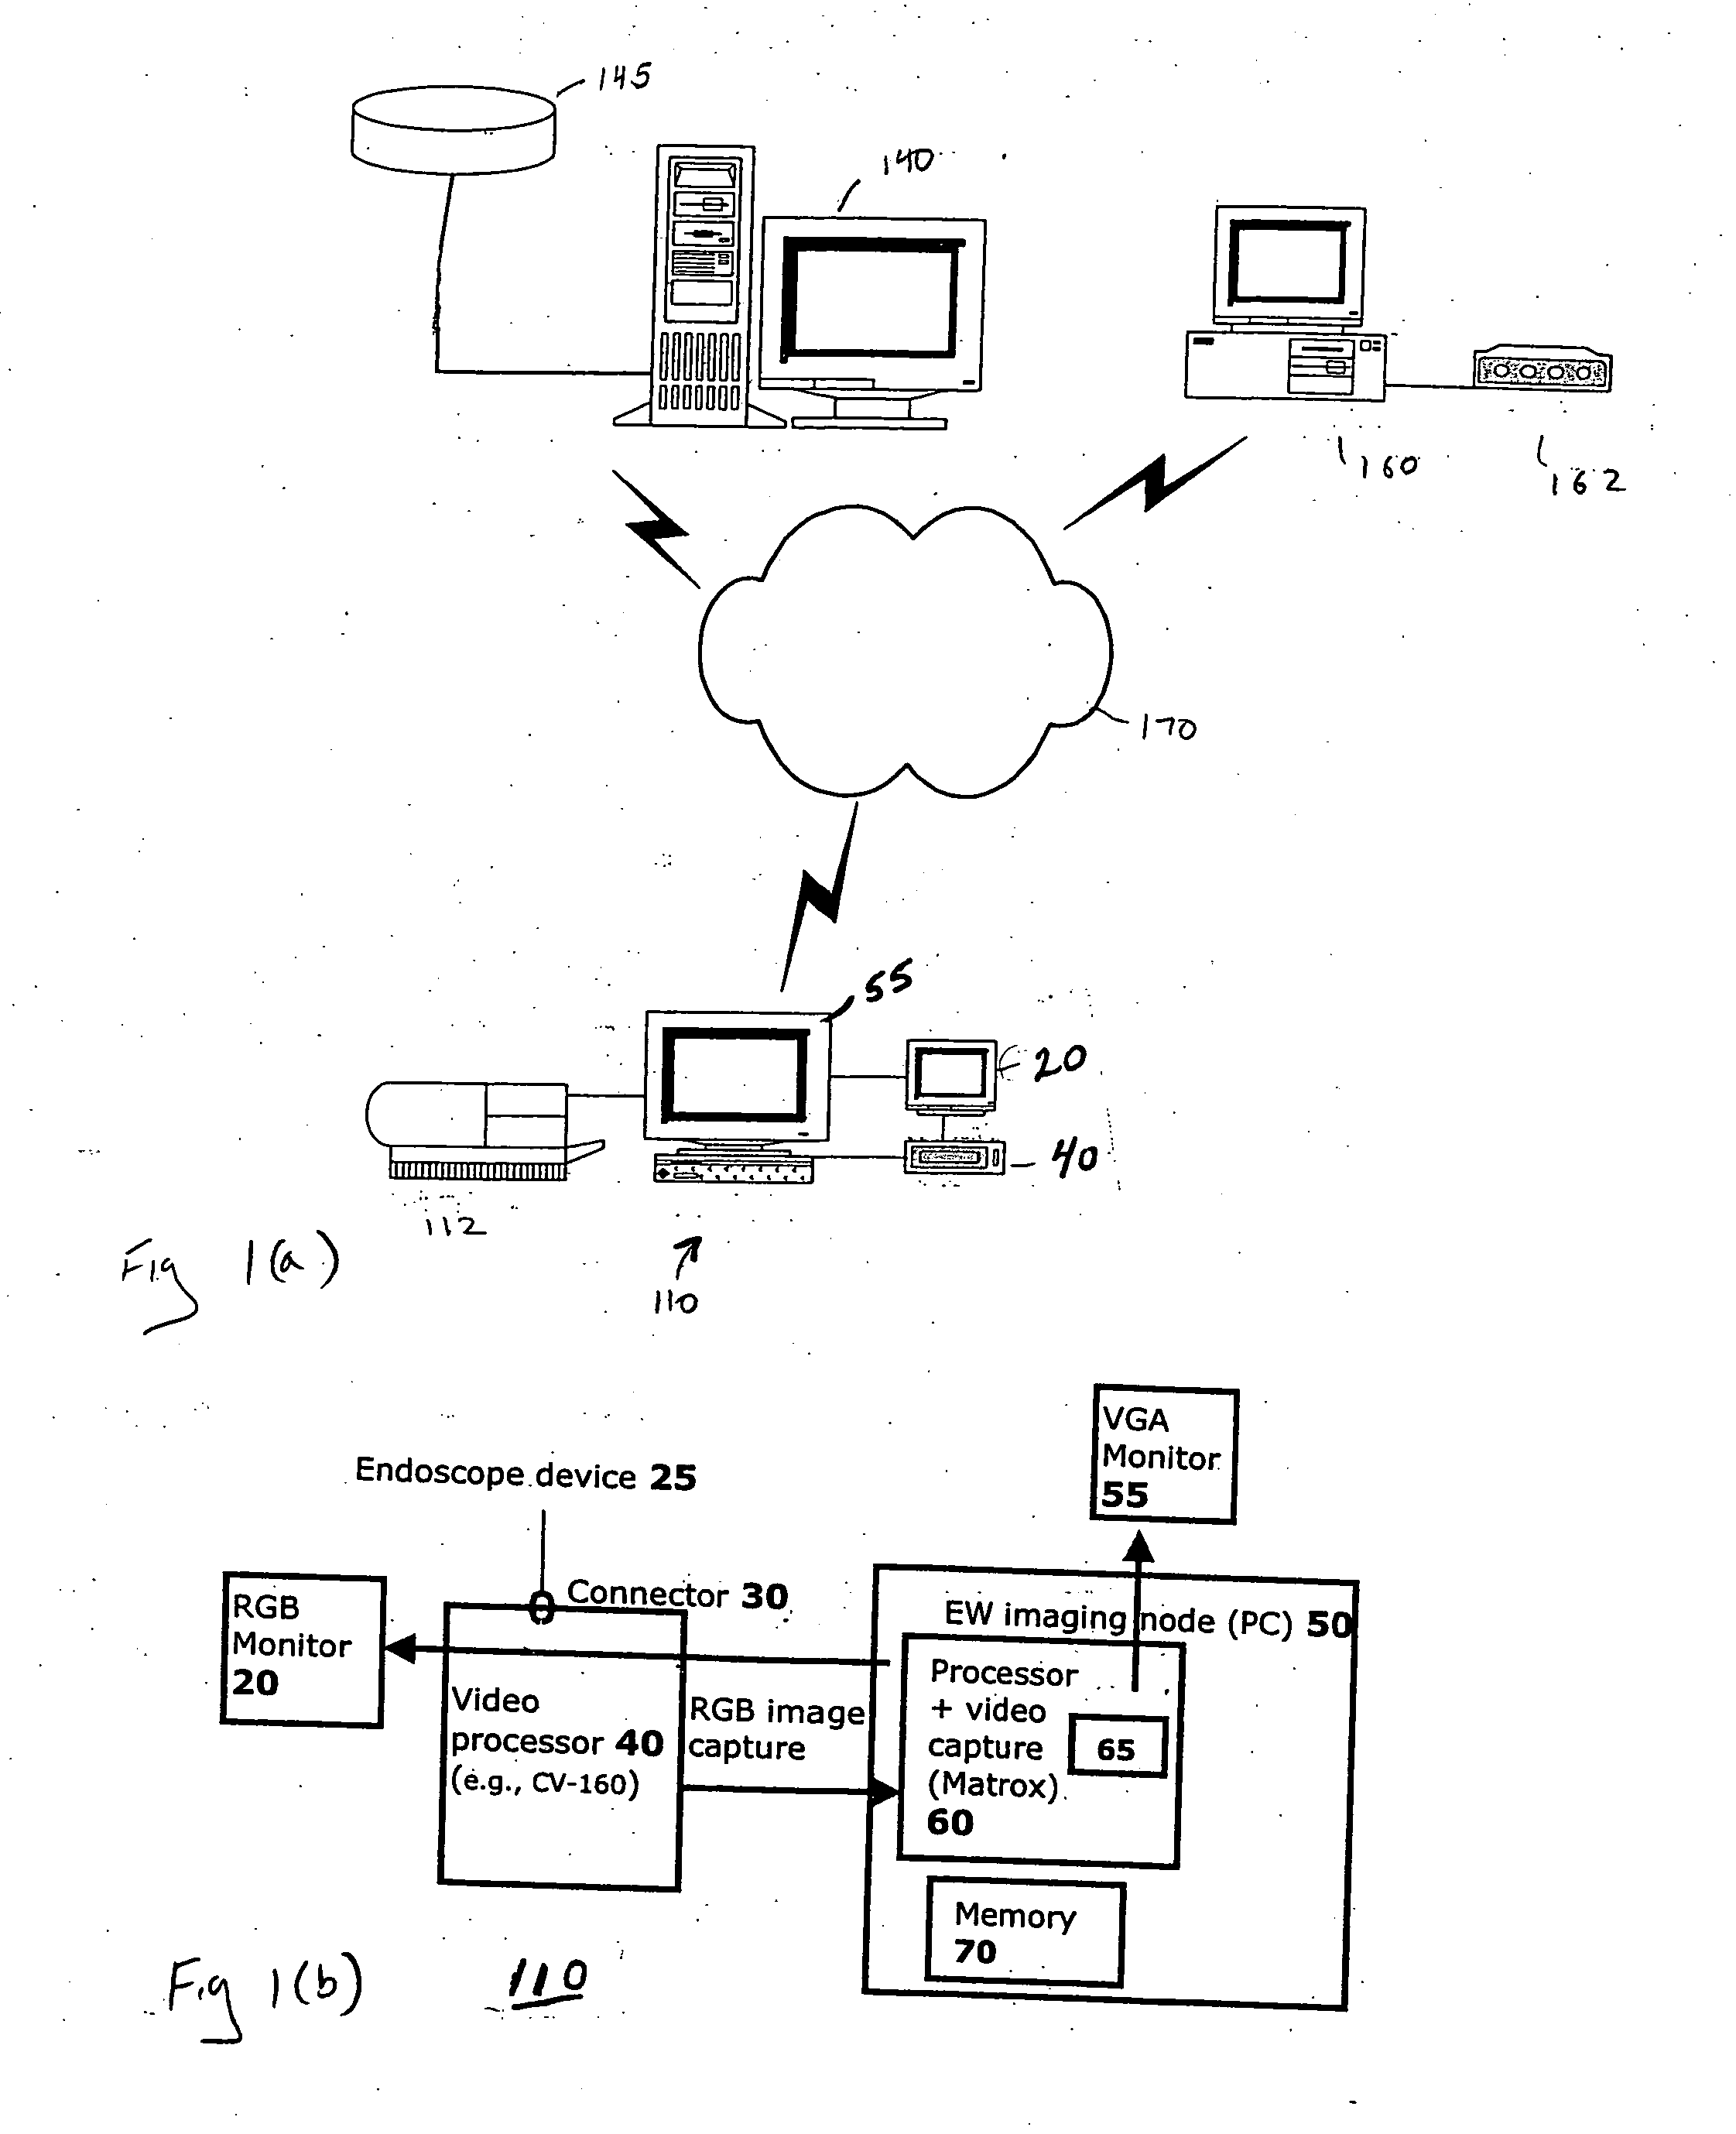 System and method for managing an endoscopic lab